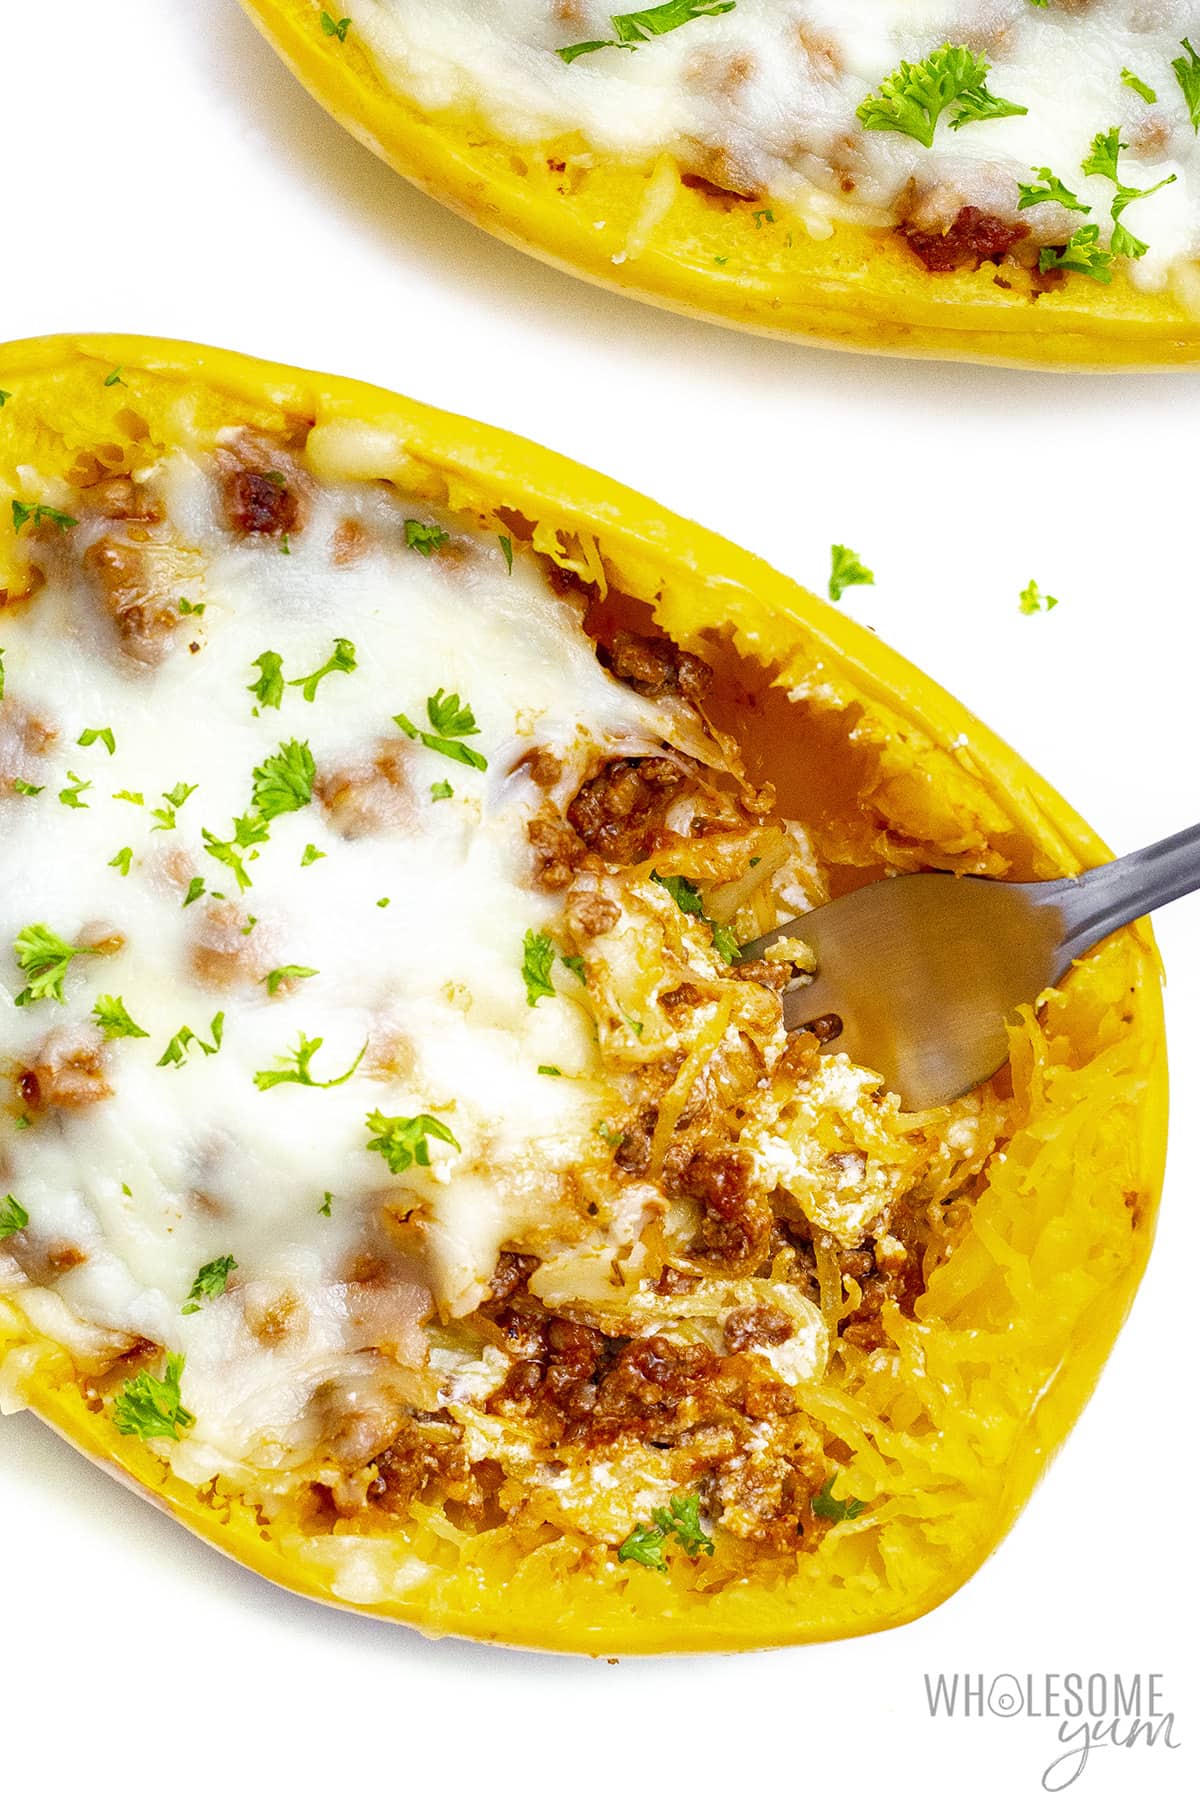 Stuffed spaghetti squash with some noodle mixture removed.